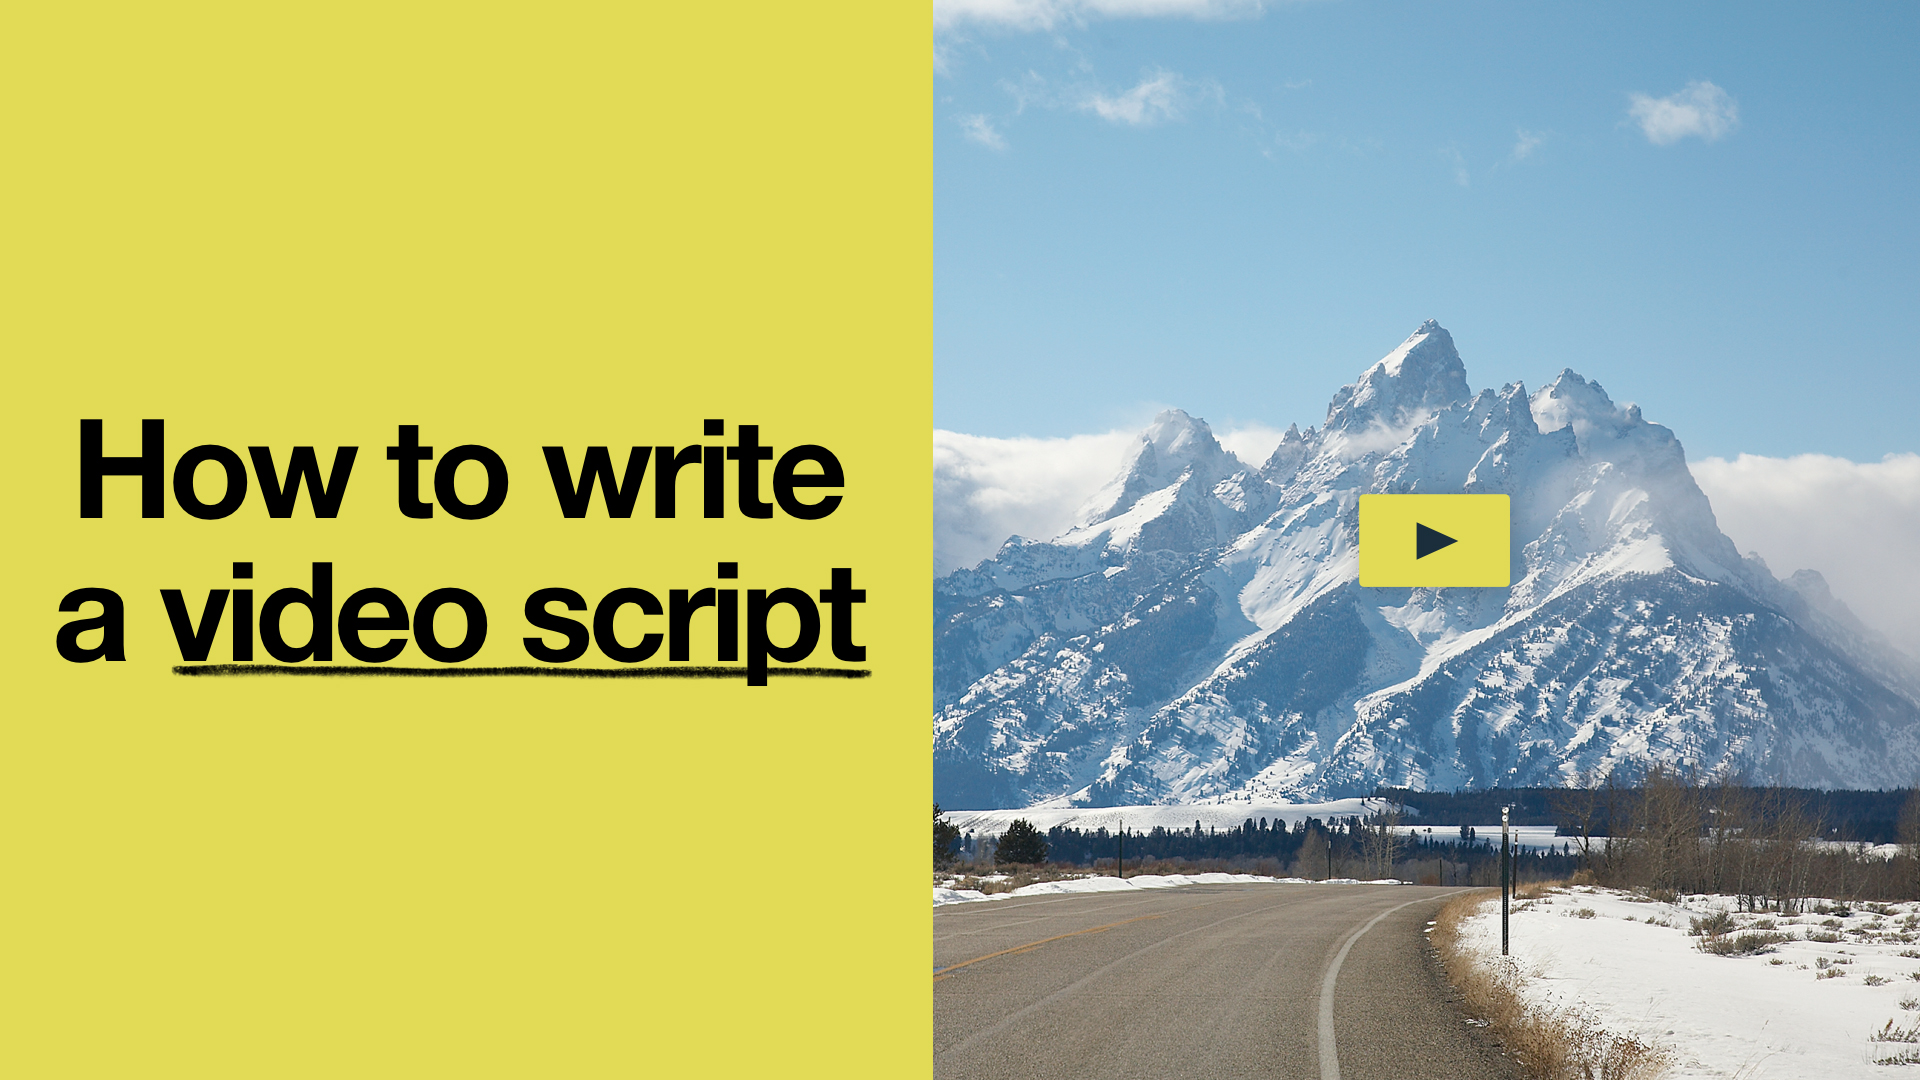 How to write a script for a video in 6 easy steps  Vimeo